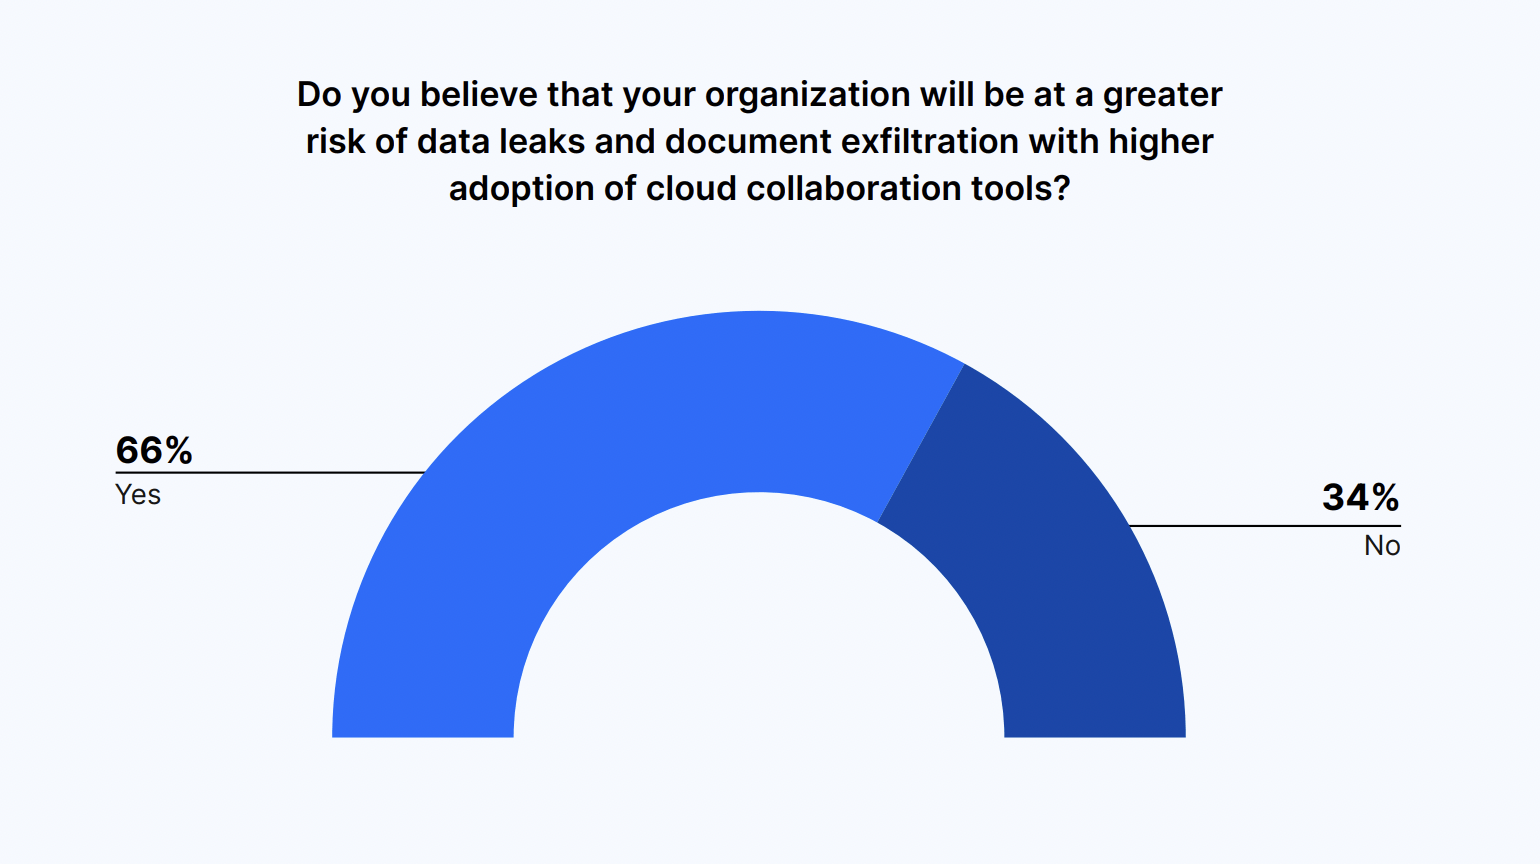 Do you believe that your organization will be at a greater risk of data leaks and document exfiltration with higher adoption of cloud collaboration tools?